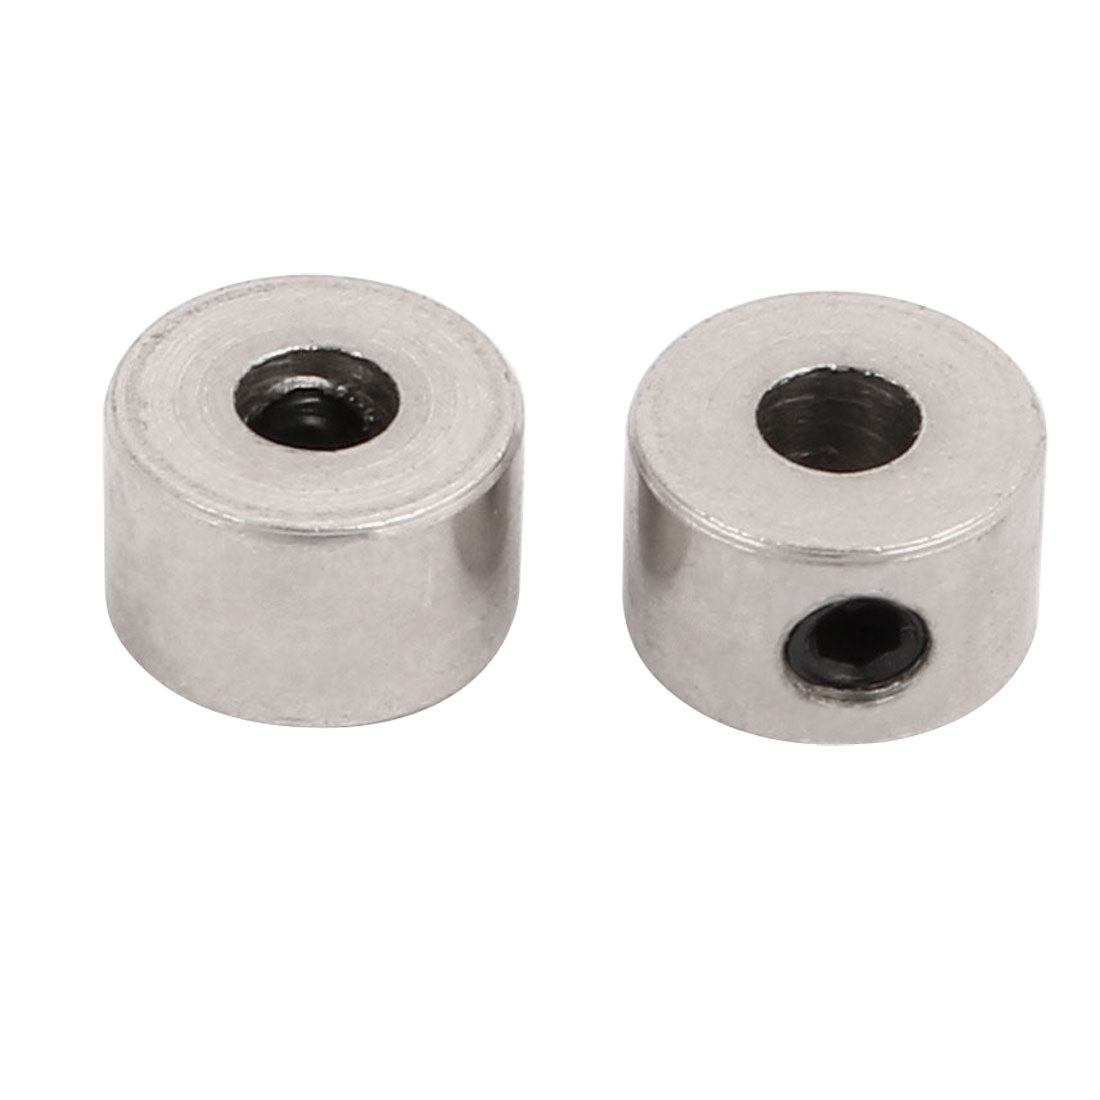 uxcell Uxcell 2Pcs RC Airplane Plane Landing Gear Wheel Stop Set  3.0mm Shaft Hole Dia.